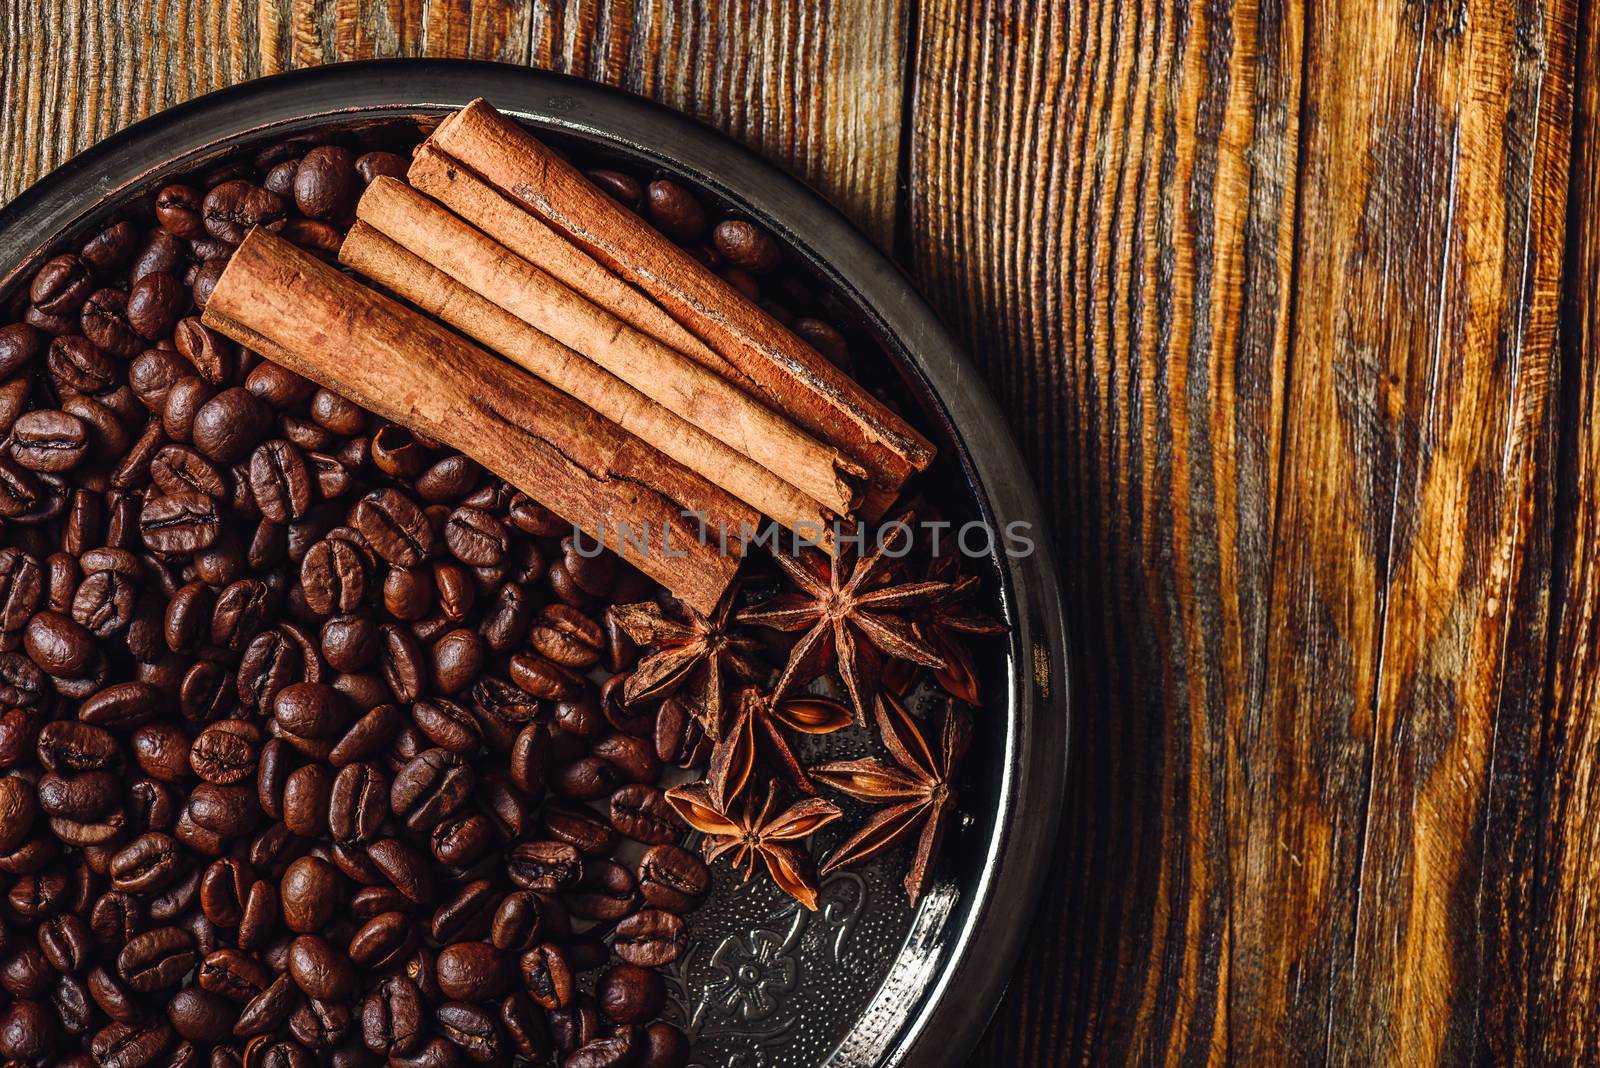 Coffee Beans with Cinnamon Sticks and Chinese Star Anise on Metal Plate. View from Above. Copy Space on the Right SIde.